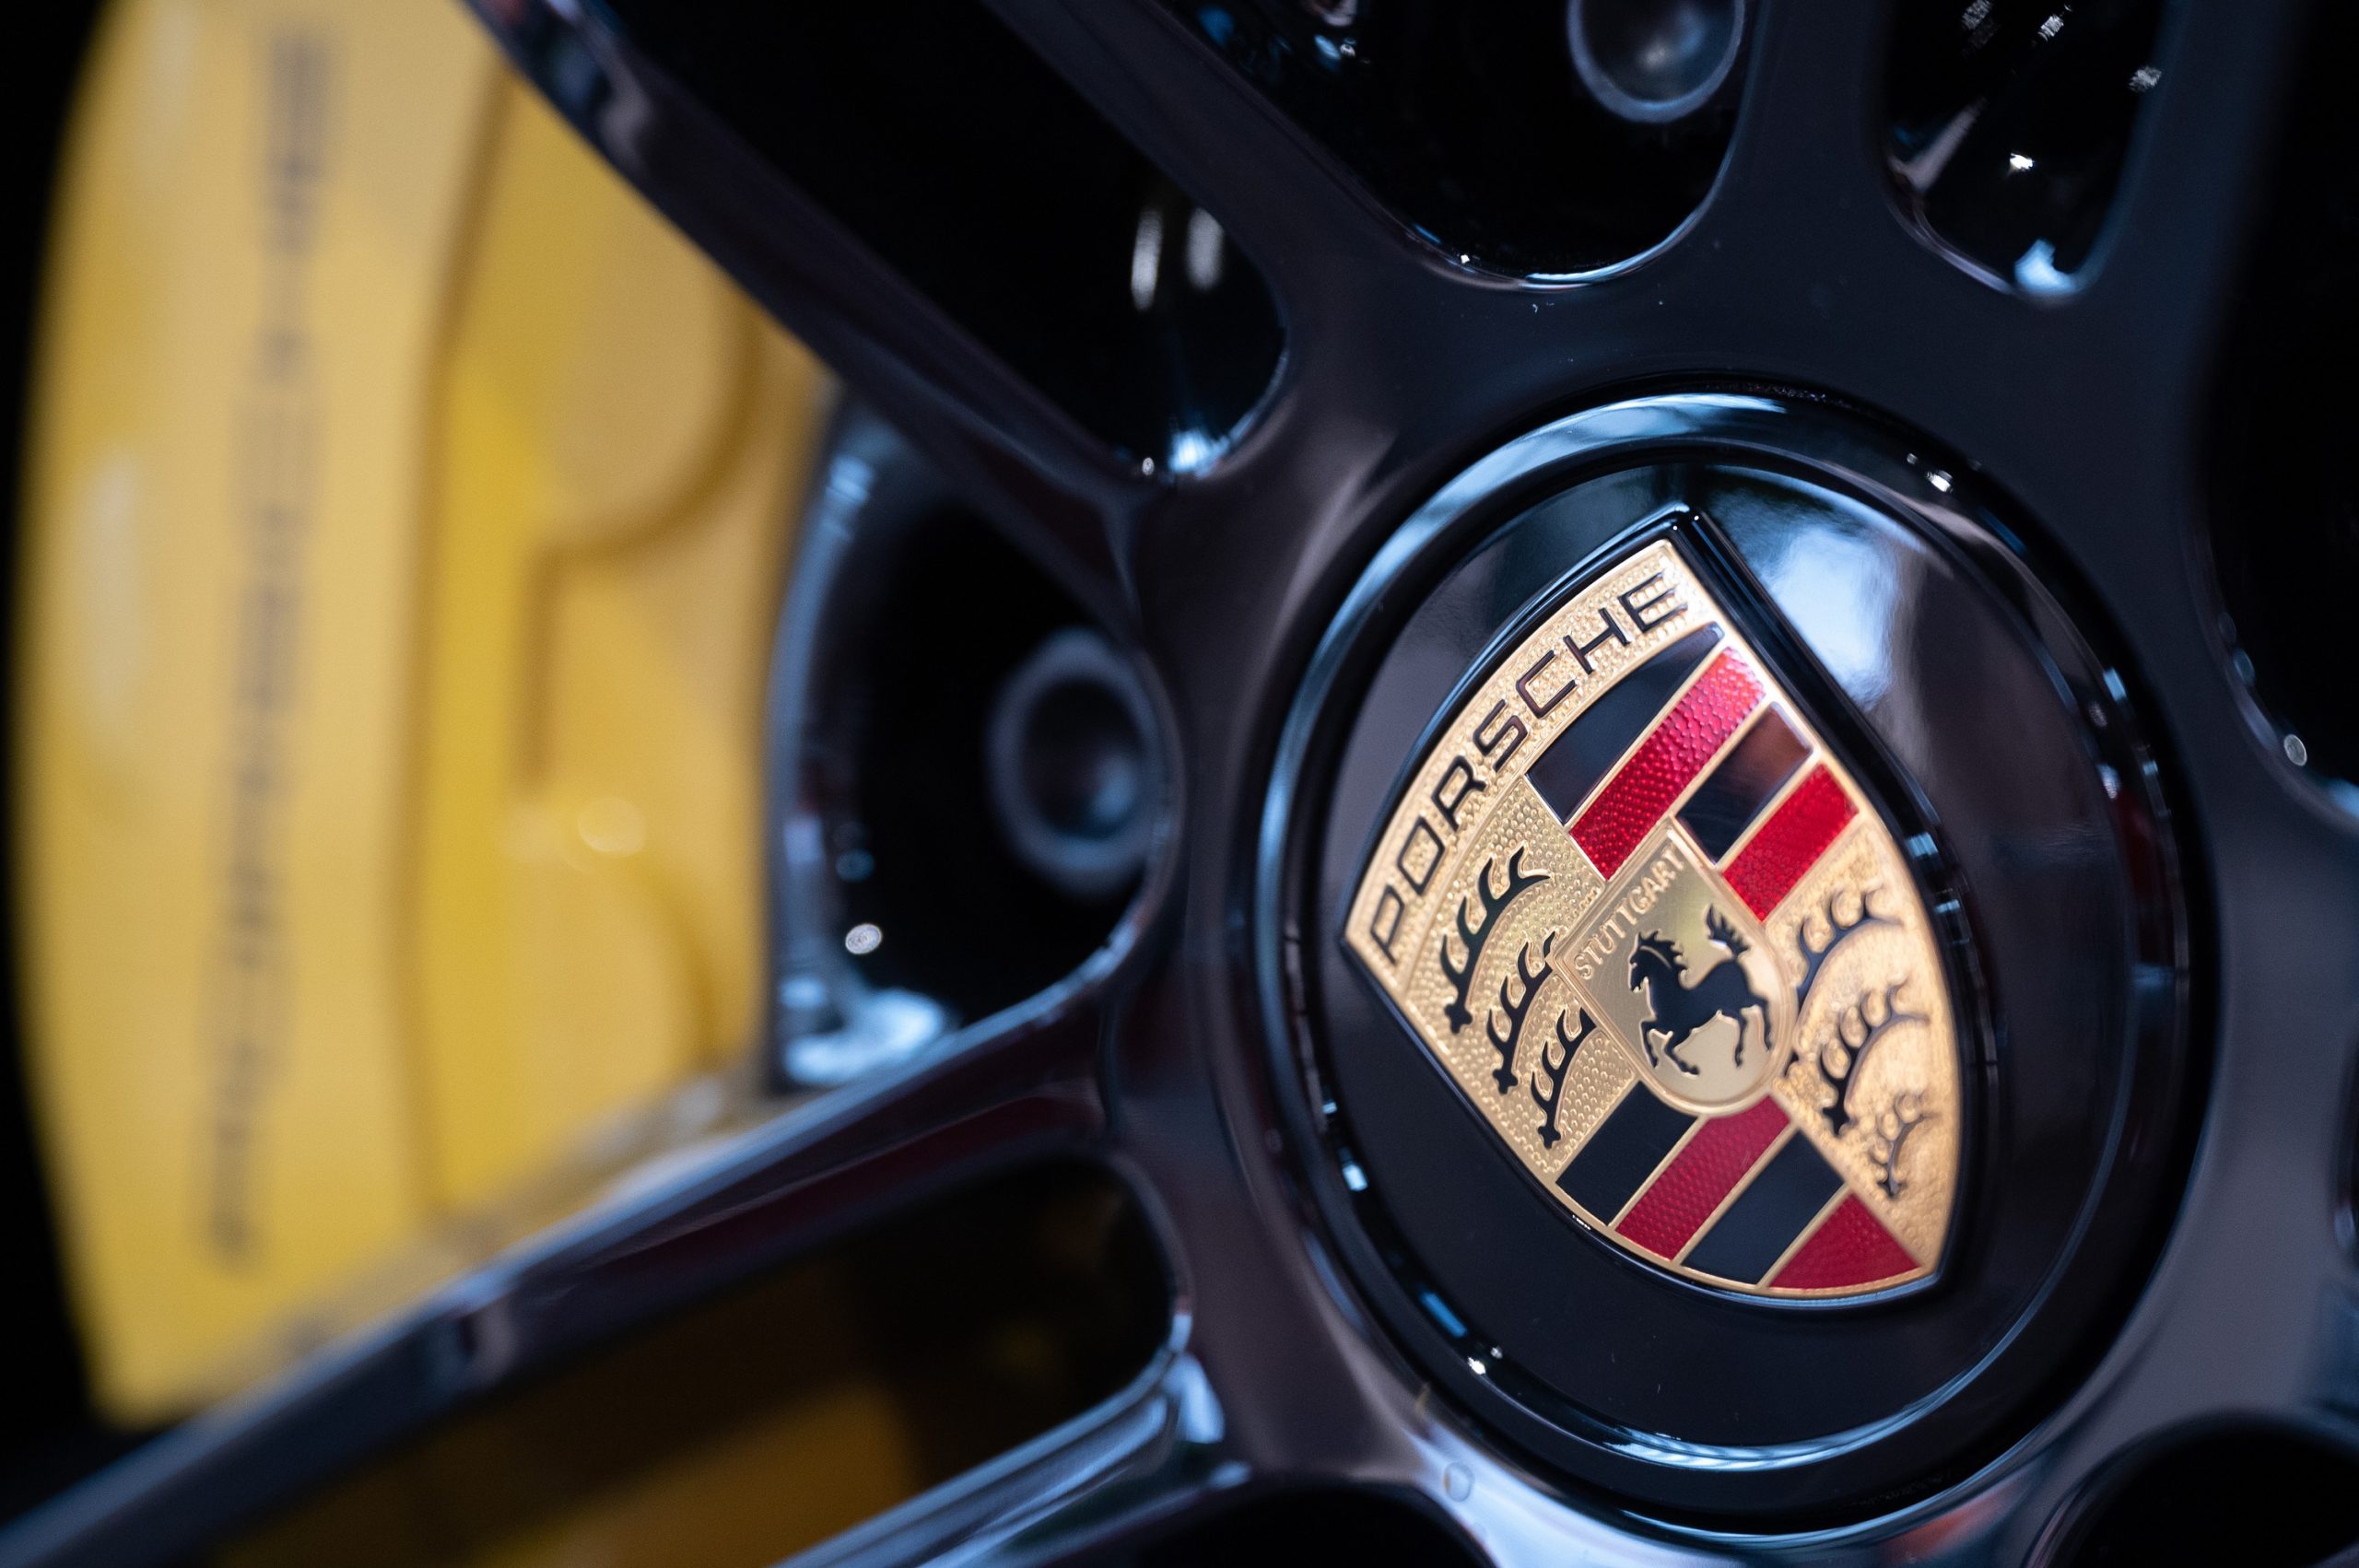 The iconic Porsche crest on the wheel of one of their models